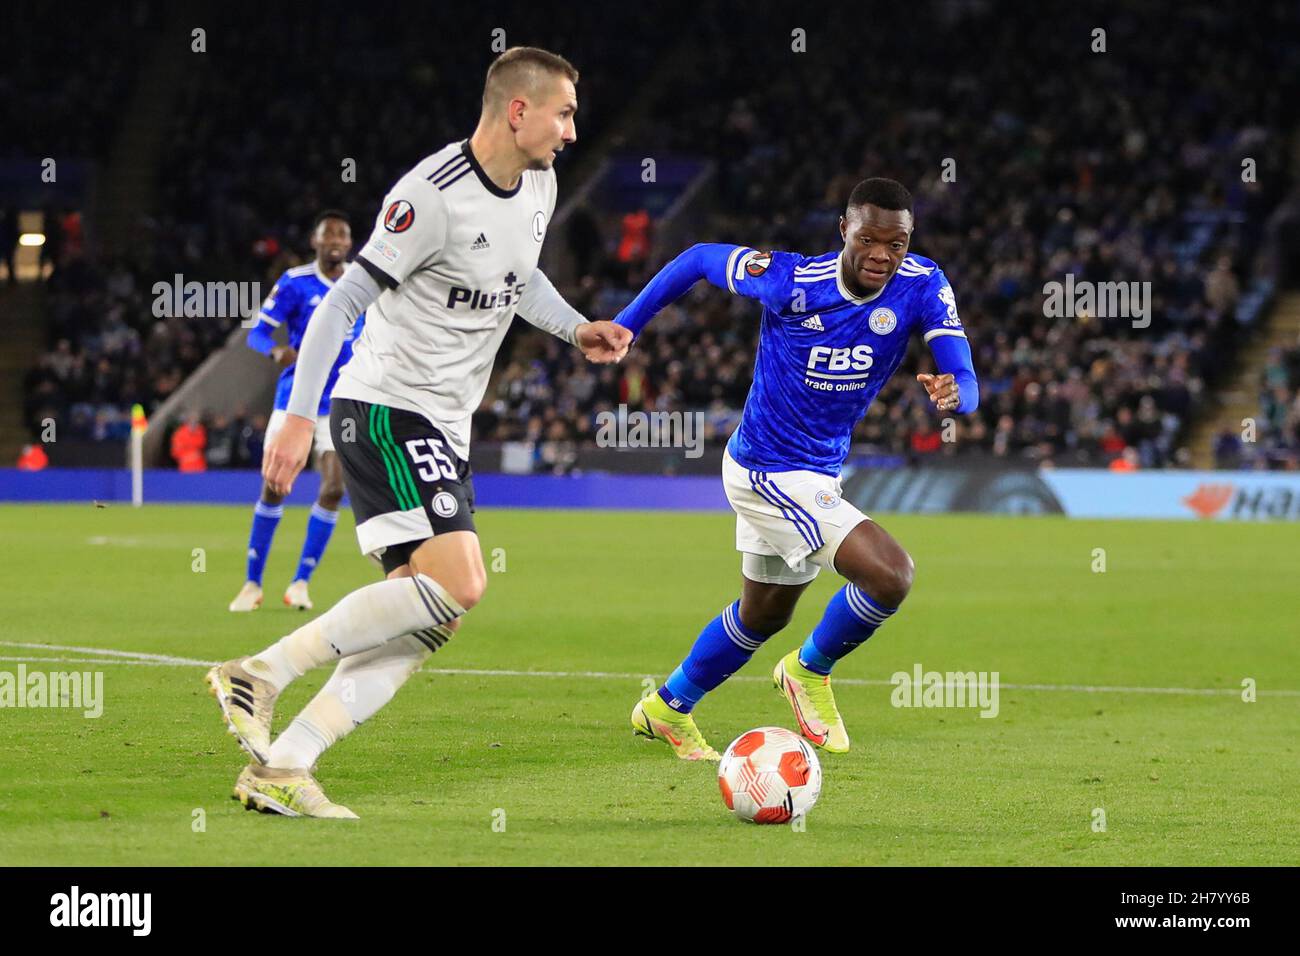 Leicester, UK. 25th Nov, 2021. Artur Jedrzejczyk #55 of Legia Warsaw is watched by Patson Daka #29 of Leicester City in Leicester, United Kingdom on 11/25/2021. (Photo by Conor Molloy/News Images/Sipa USA) Credit: Sipa USA/Alamy Live News Stock Photo